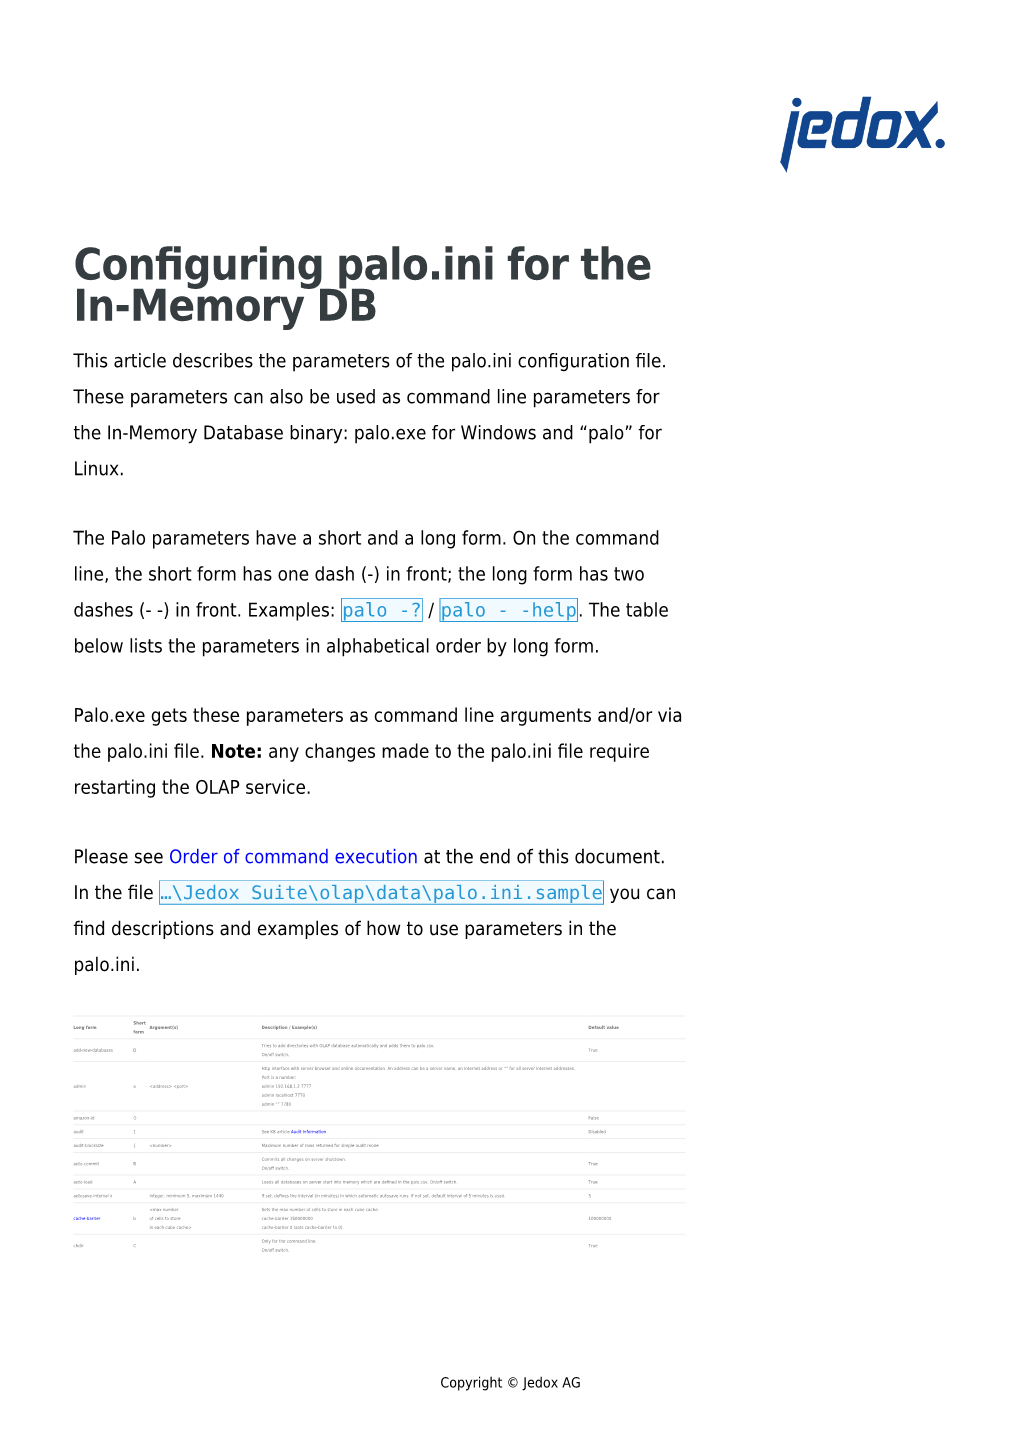 Configuring Palo.Ini for the In-Memory DB